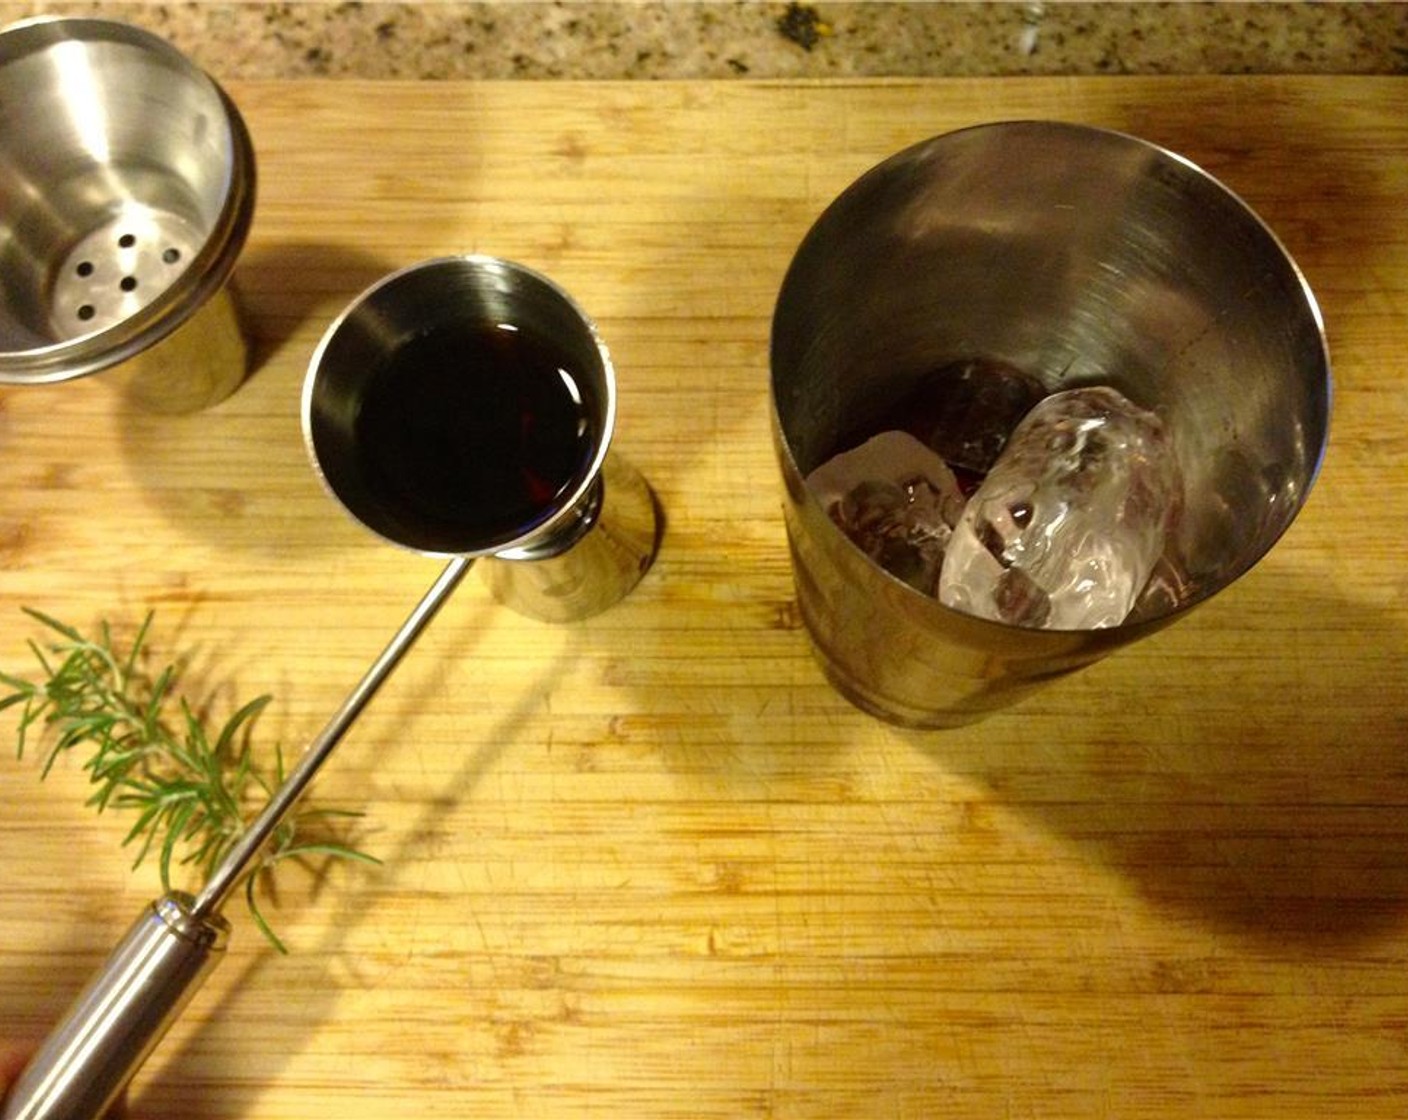 step 9 Add Sweet Vermouth (1 fl oz). Go light on the sweet vermouth if you don't like your drinks very sweet.